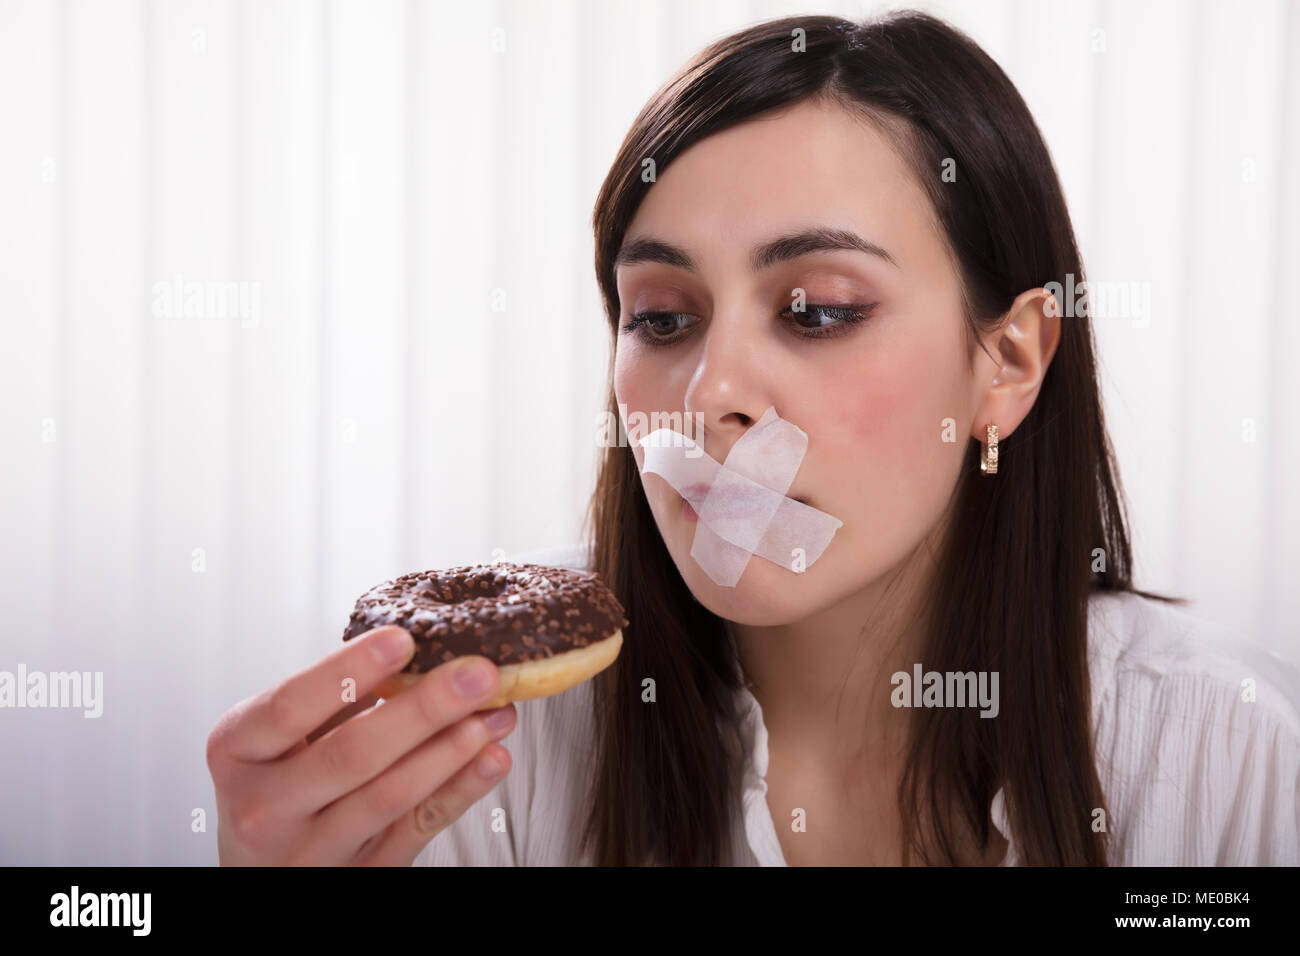 Close-up Of A Young Woman With Sticky Tape Over Her Mouth Unable To Eat Donut Stock Photo